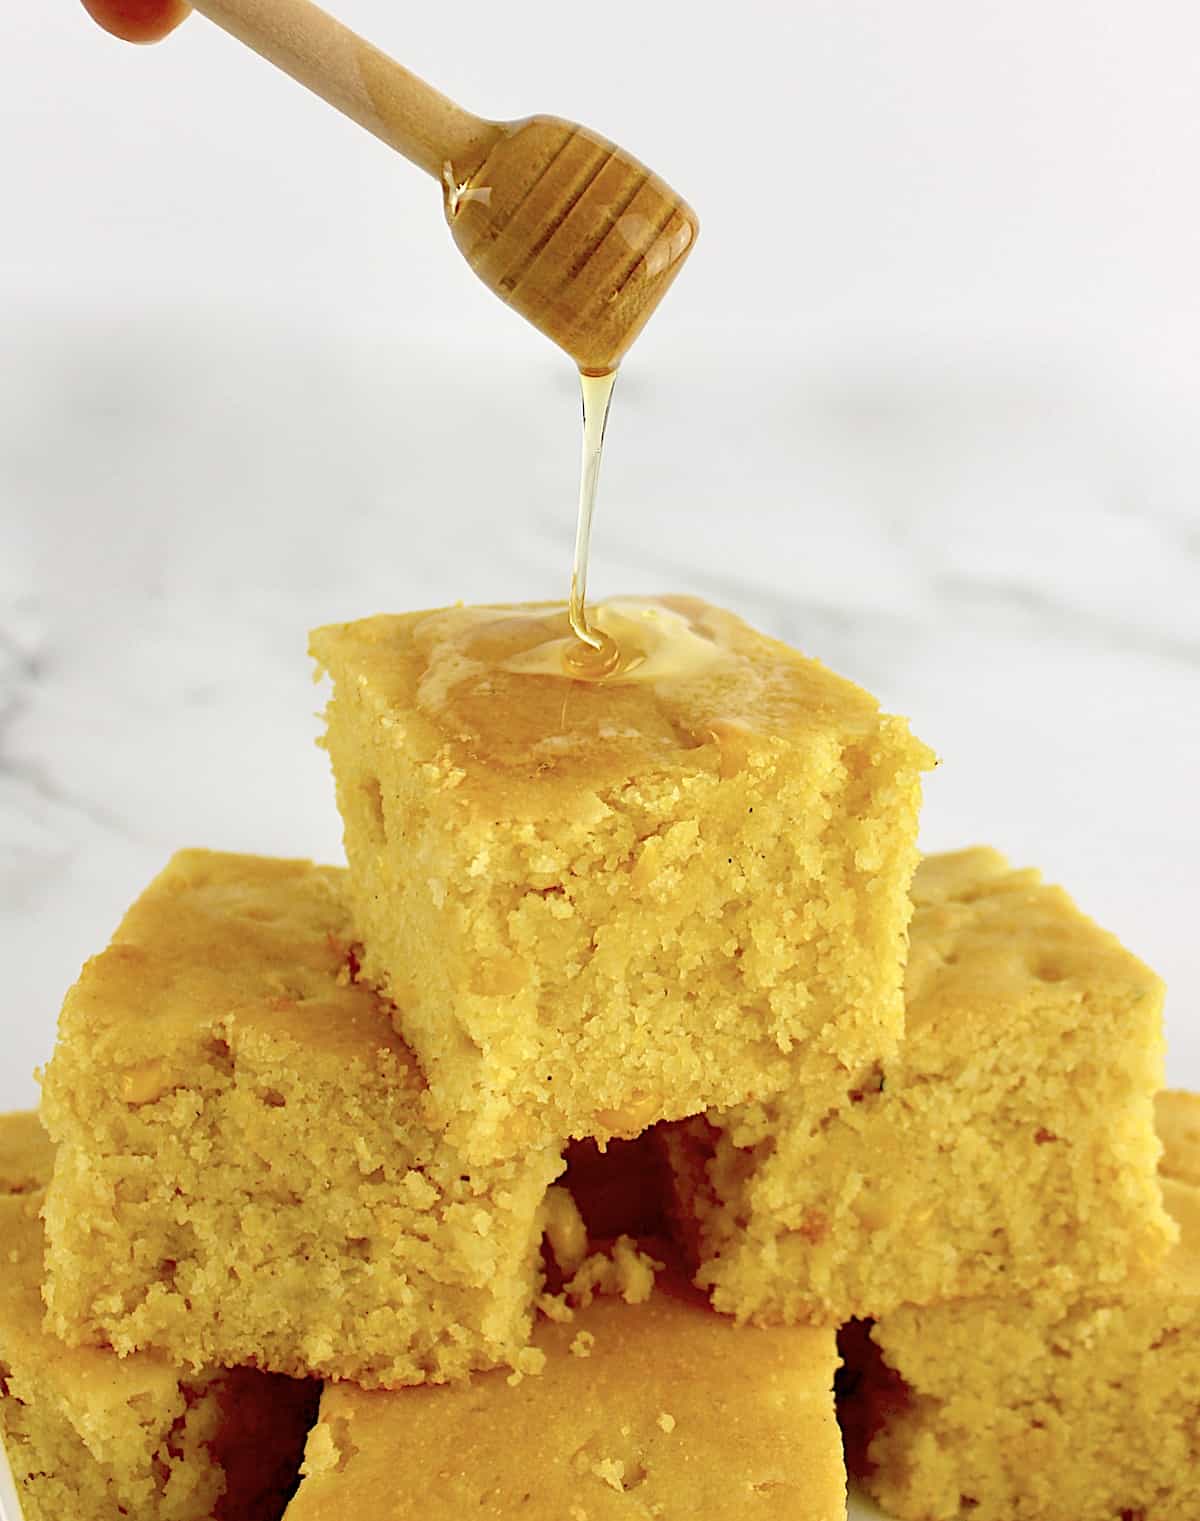 Gluten Free Cornbread slice with honey being drizzled over top